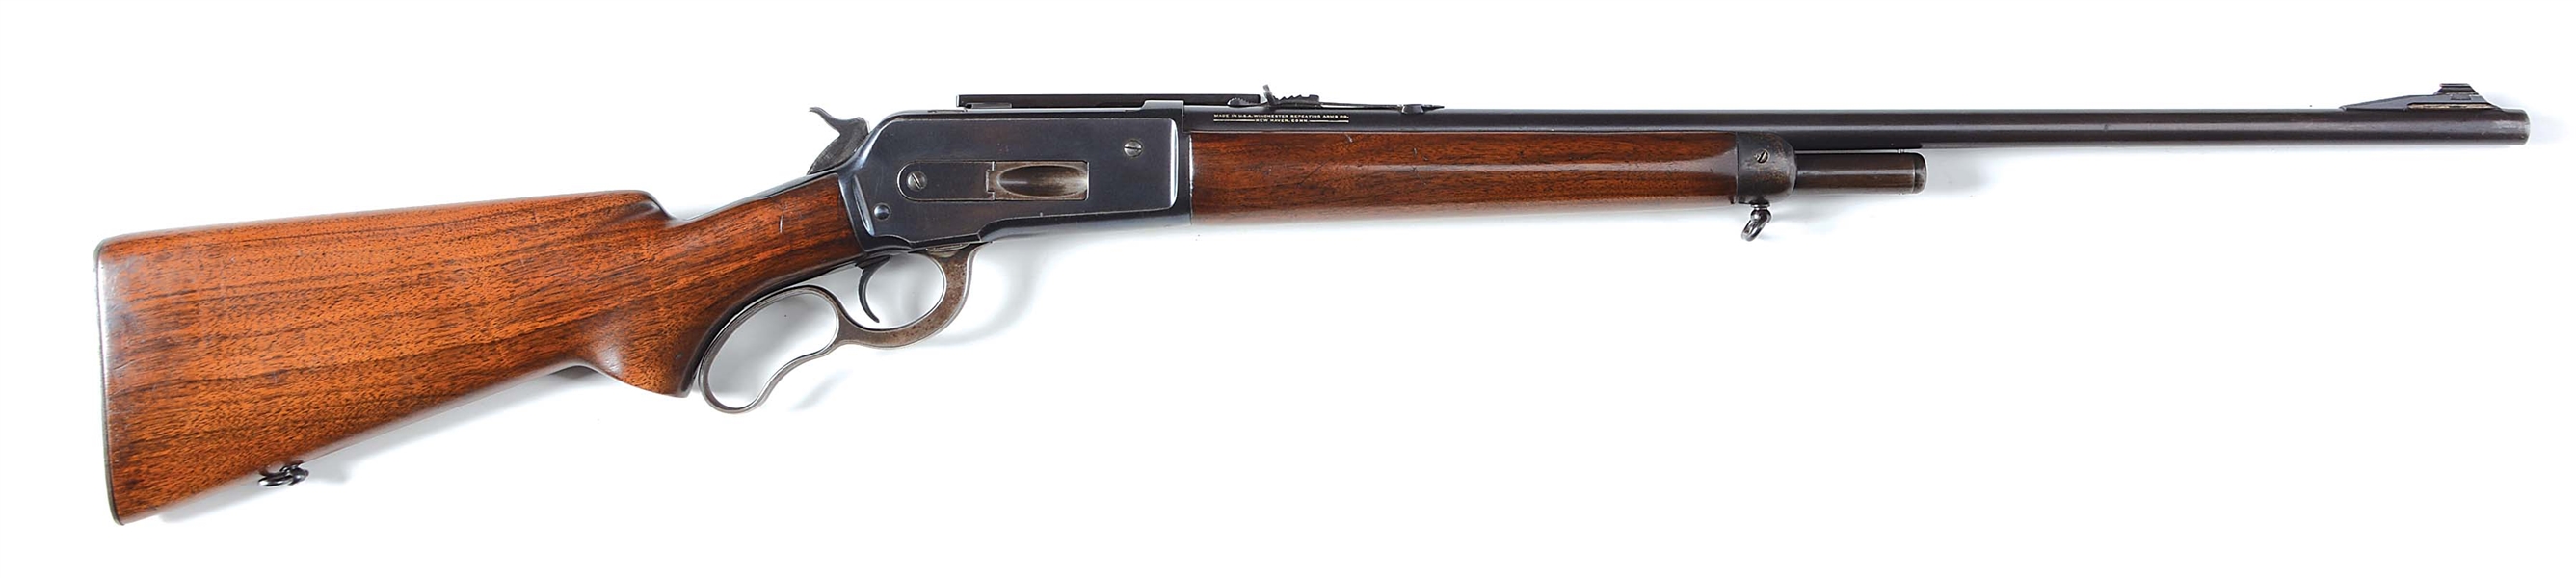 (C) WINCHESTER MODEL 71 LEVER ACTION RIFLE WITH SCOPE MOUNT (1941).